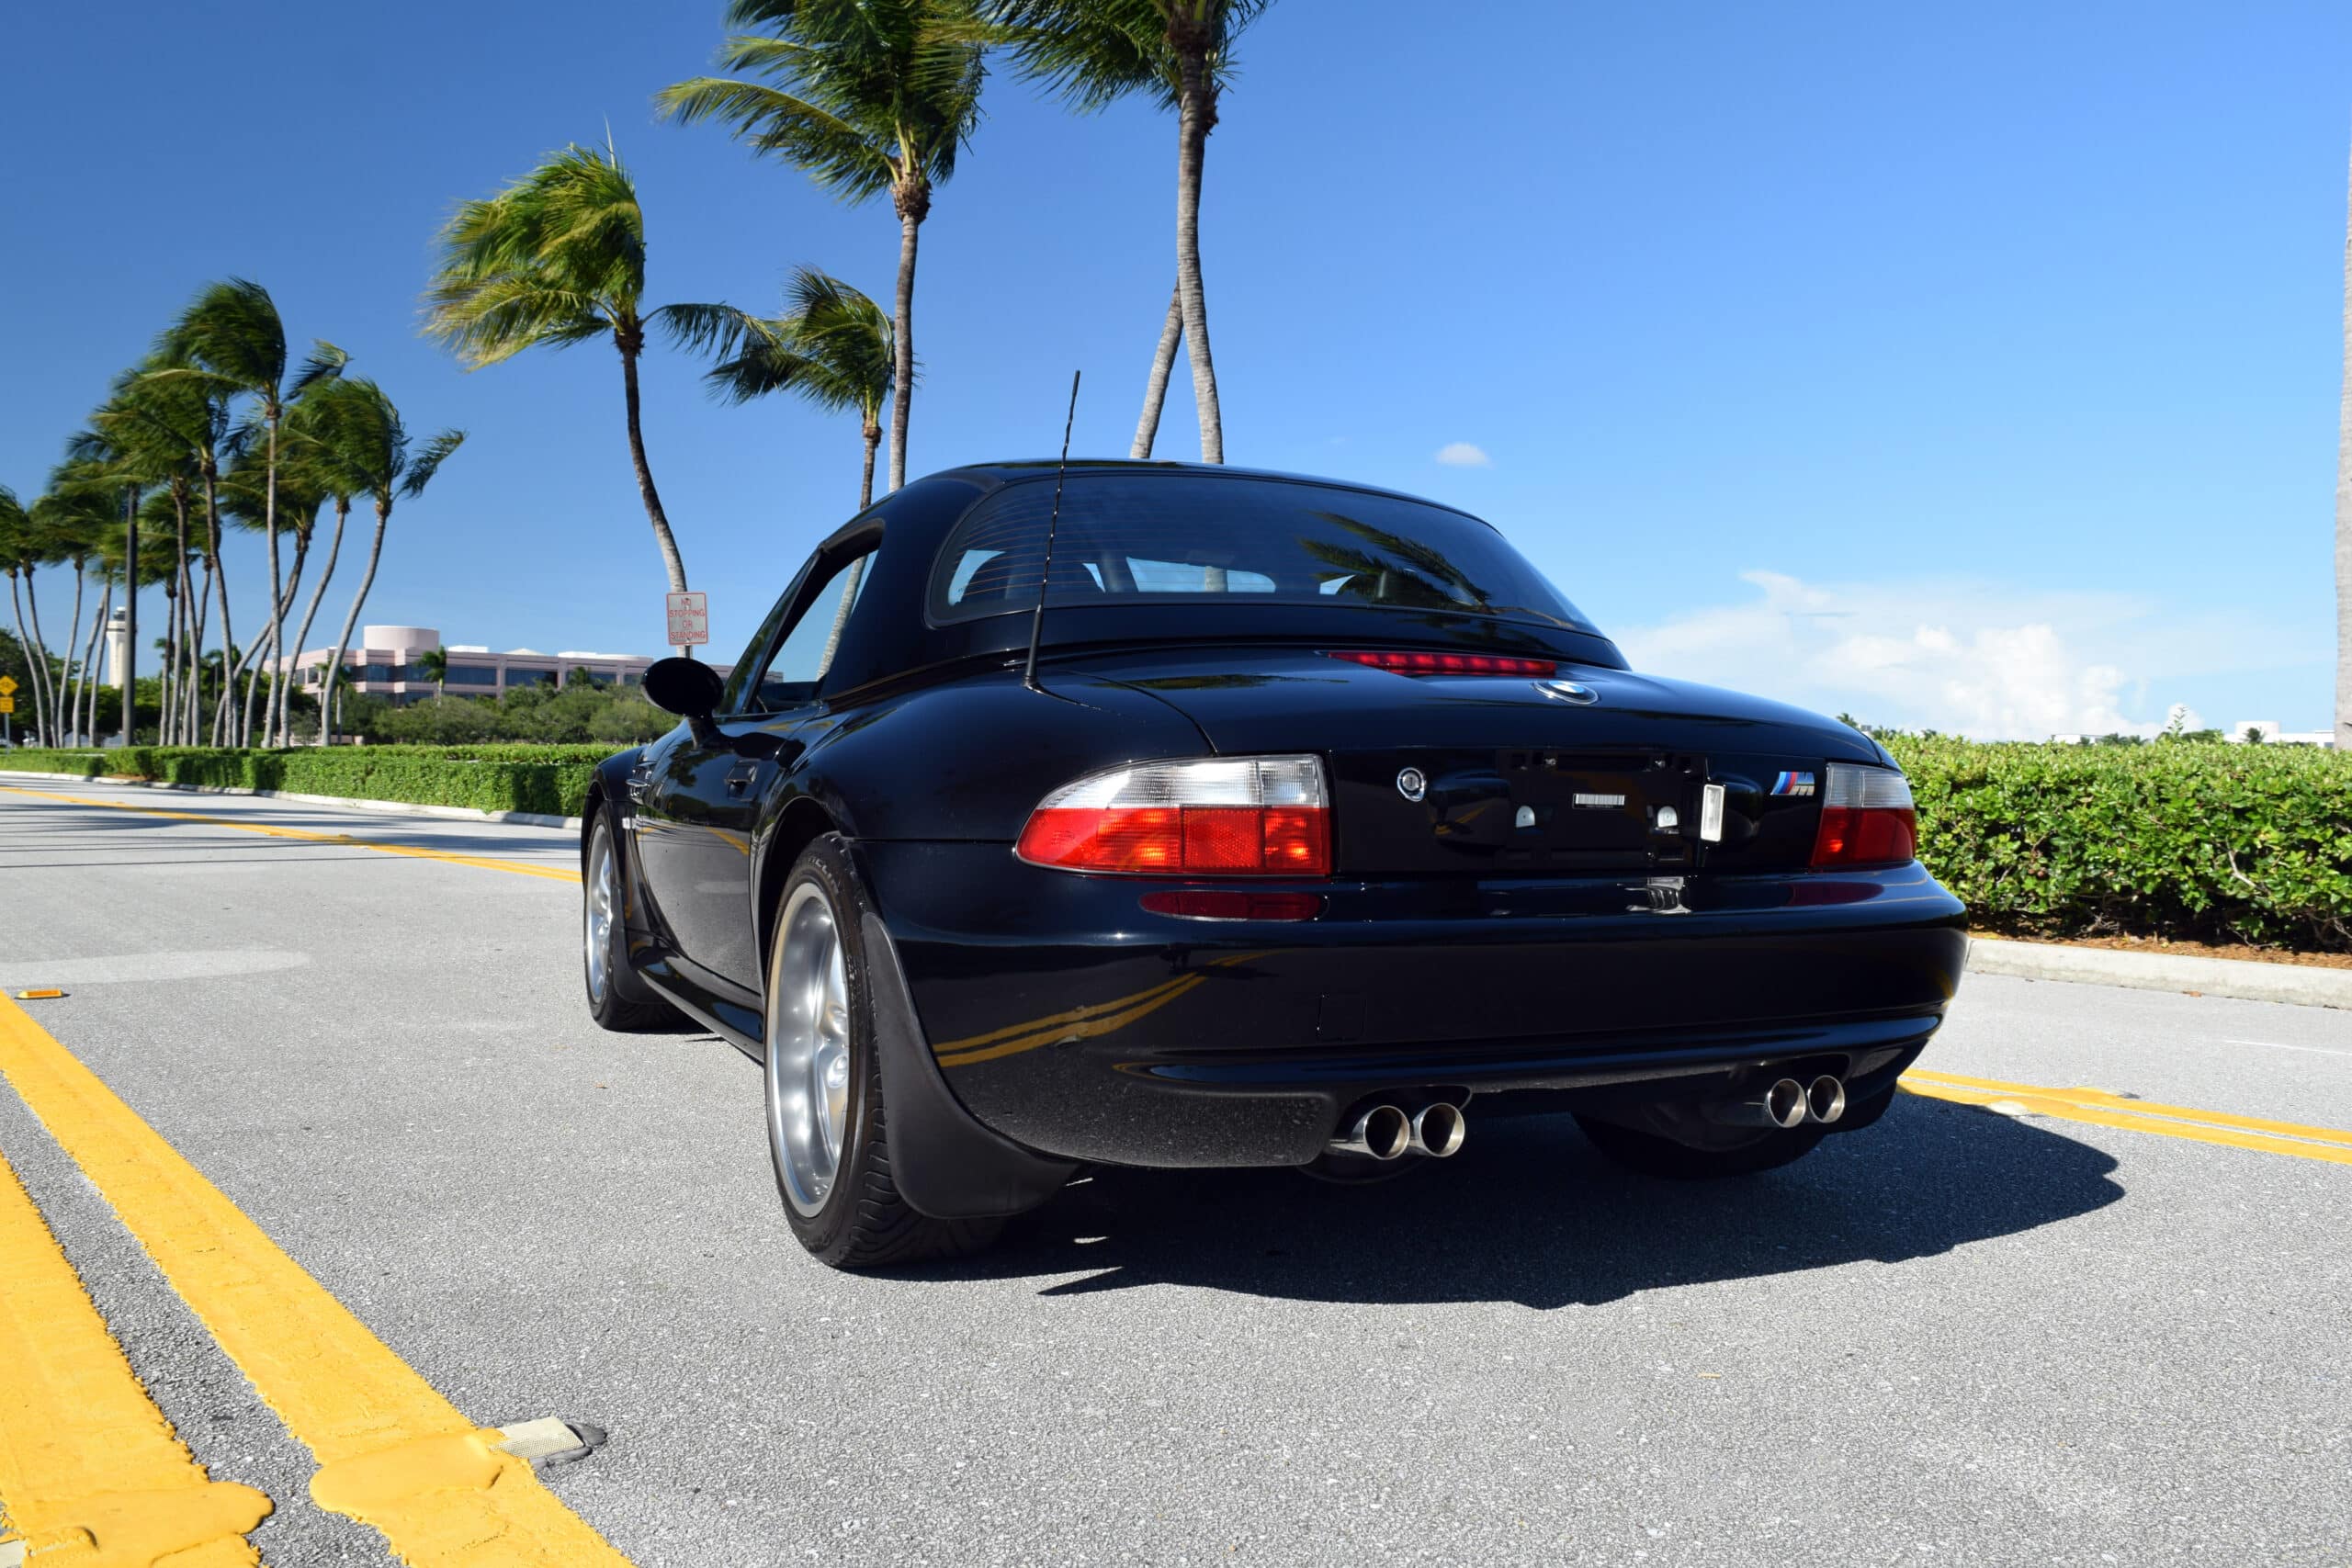 2001 BMW Z3M Roadster, 11K actual miles, S54 Engine, hard top, all original paint, collector grade